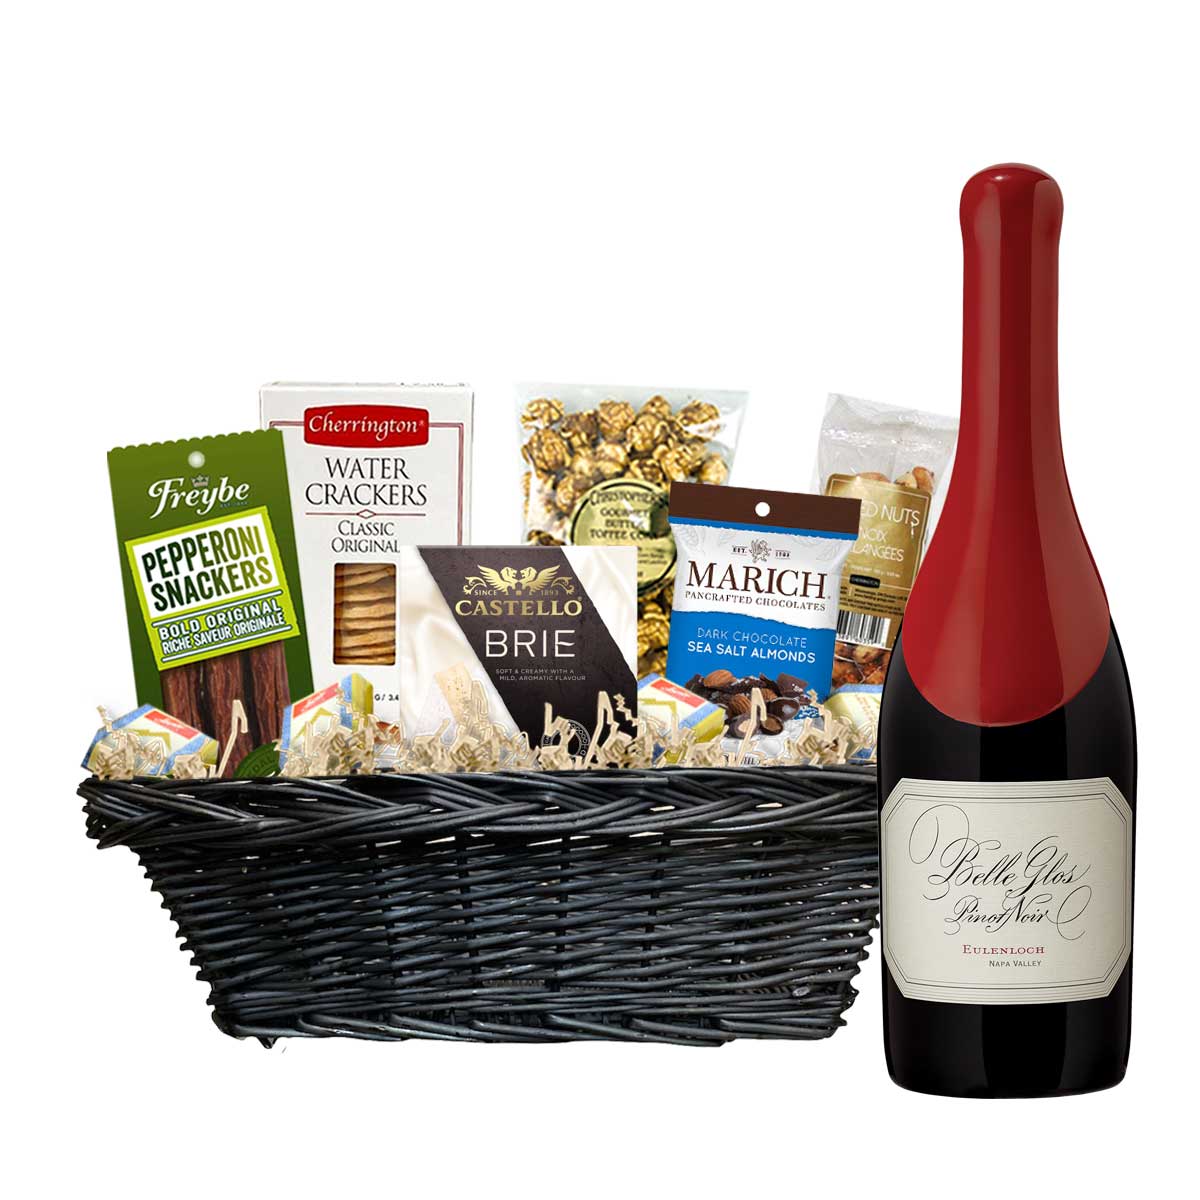 TAG Liquor Stores Canada Delivery-Belle Gloss Pinot Noir (Eulenloch) 750ml Corporate Gift Basket-wine-tagliquorstores.com